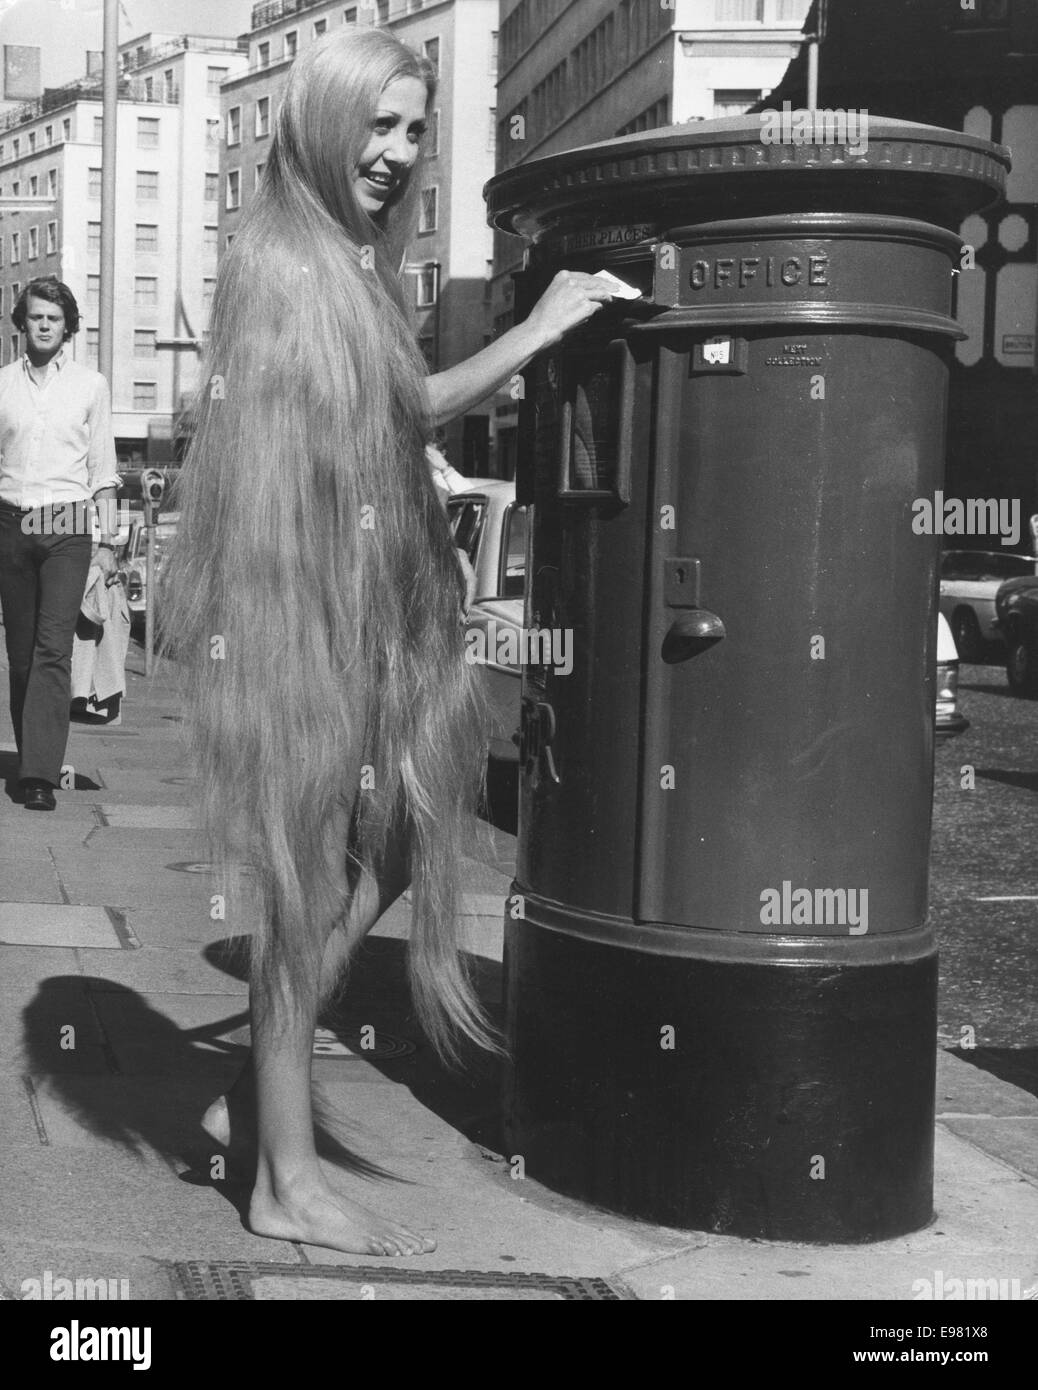 London, UK, UK. 3rd Sep, 1969. The longest wig in the world, the 'Godiva' wig, is modeled by 19-year-old Holly O'Neill as she posts a letter outside a new hair salon opening at 31 Bruton Street. © KEYSTONE Pictures/ZUMA Wire/ZUMAPRESS.com/Alamy Live News Stock Photo